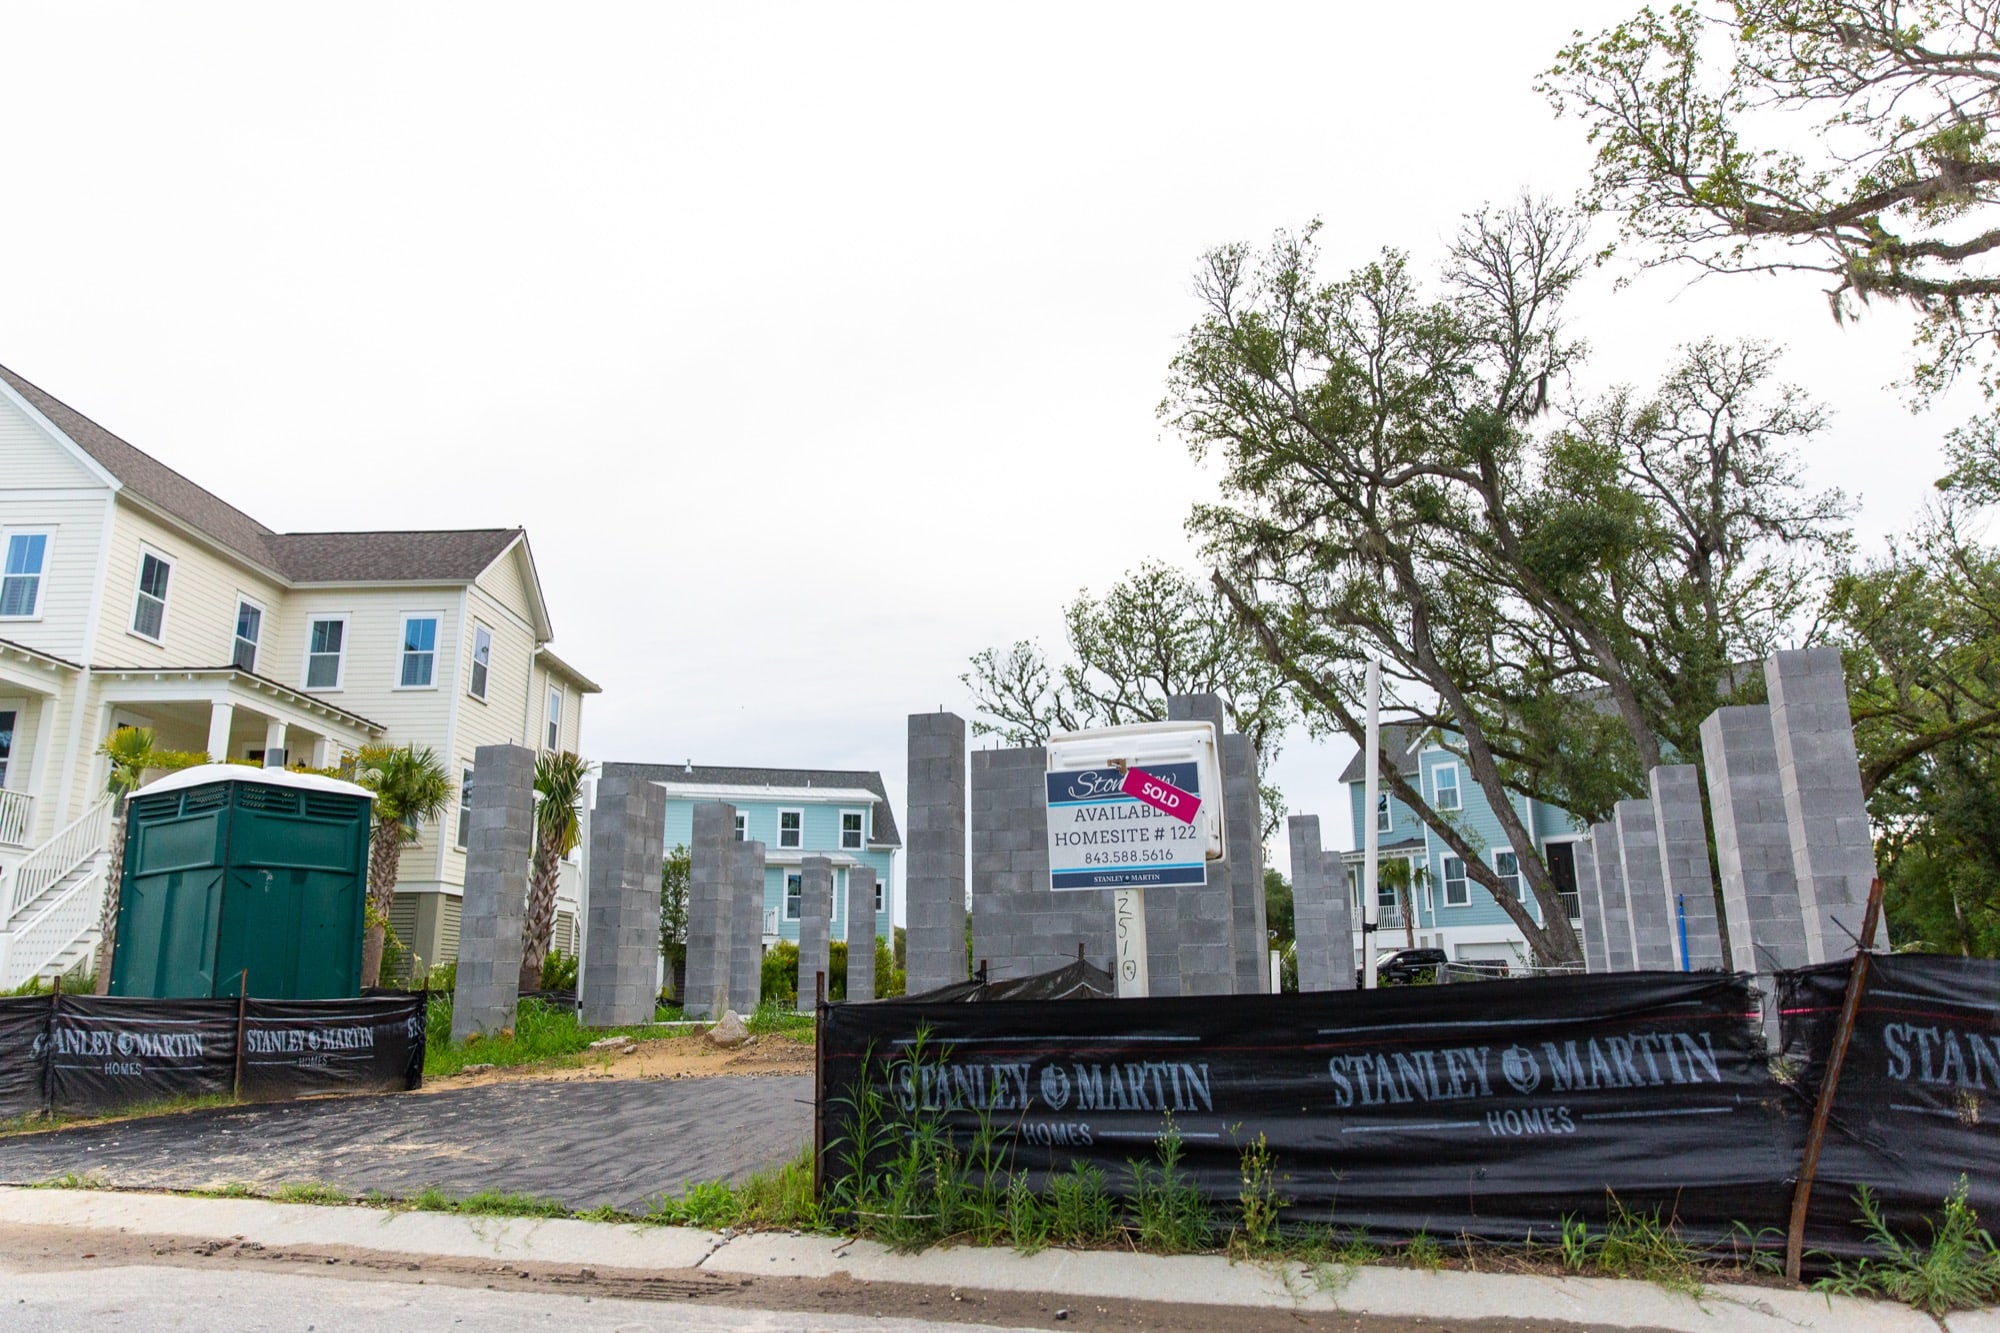 Builders of the Stonoview development in a low-lying suburb of Charleston, South Carolina, used fill dirt to elevate homes to protect them from flooding. But fill dirt doesn’t absorb water like porous organic topsoil, which can force water into areas that previously had no flooding. (Ellen O'Brien/News21)